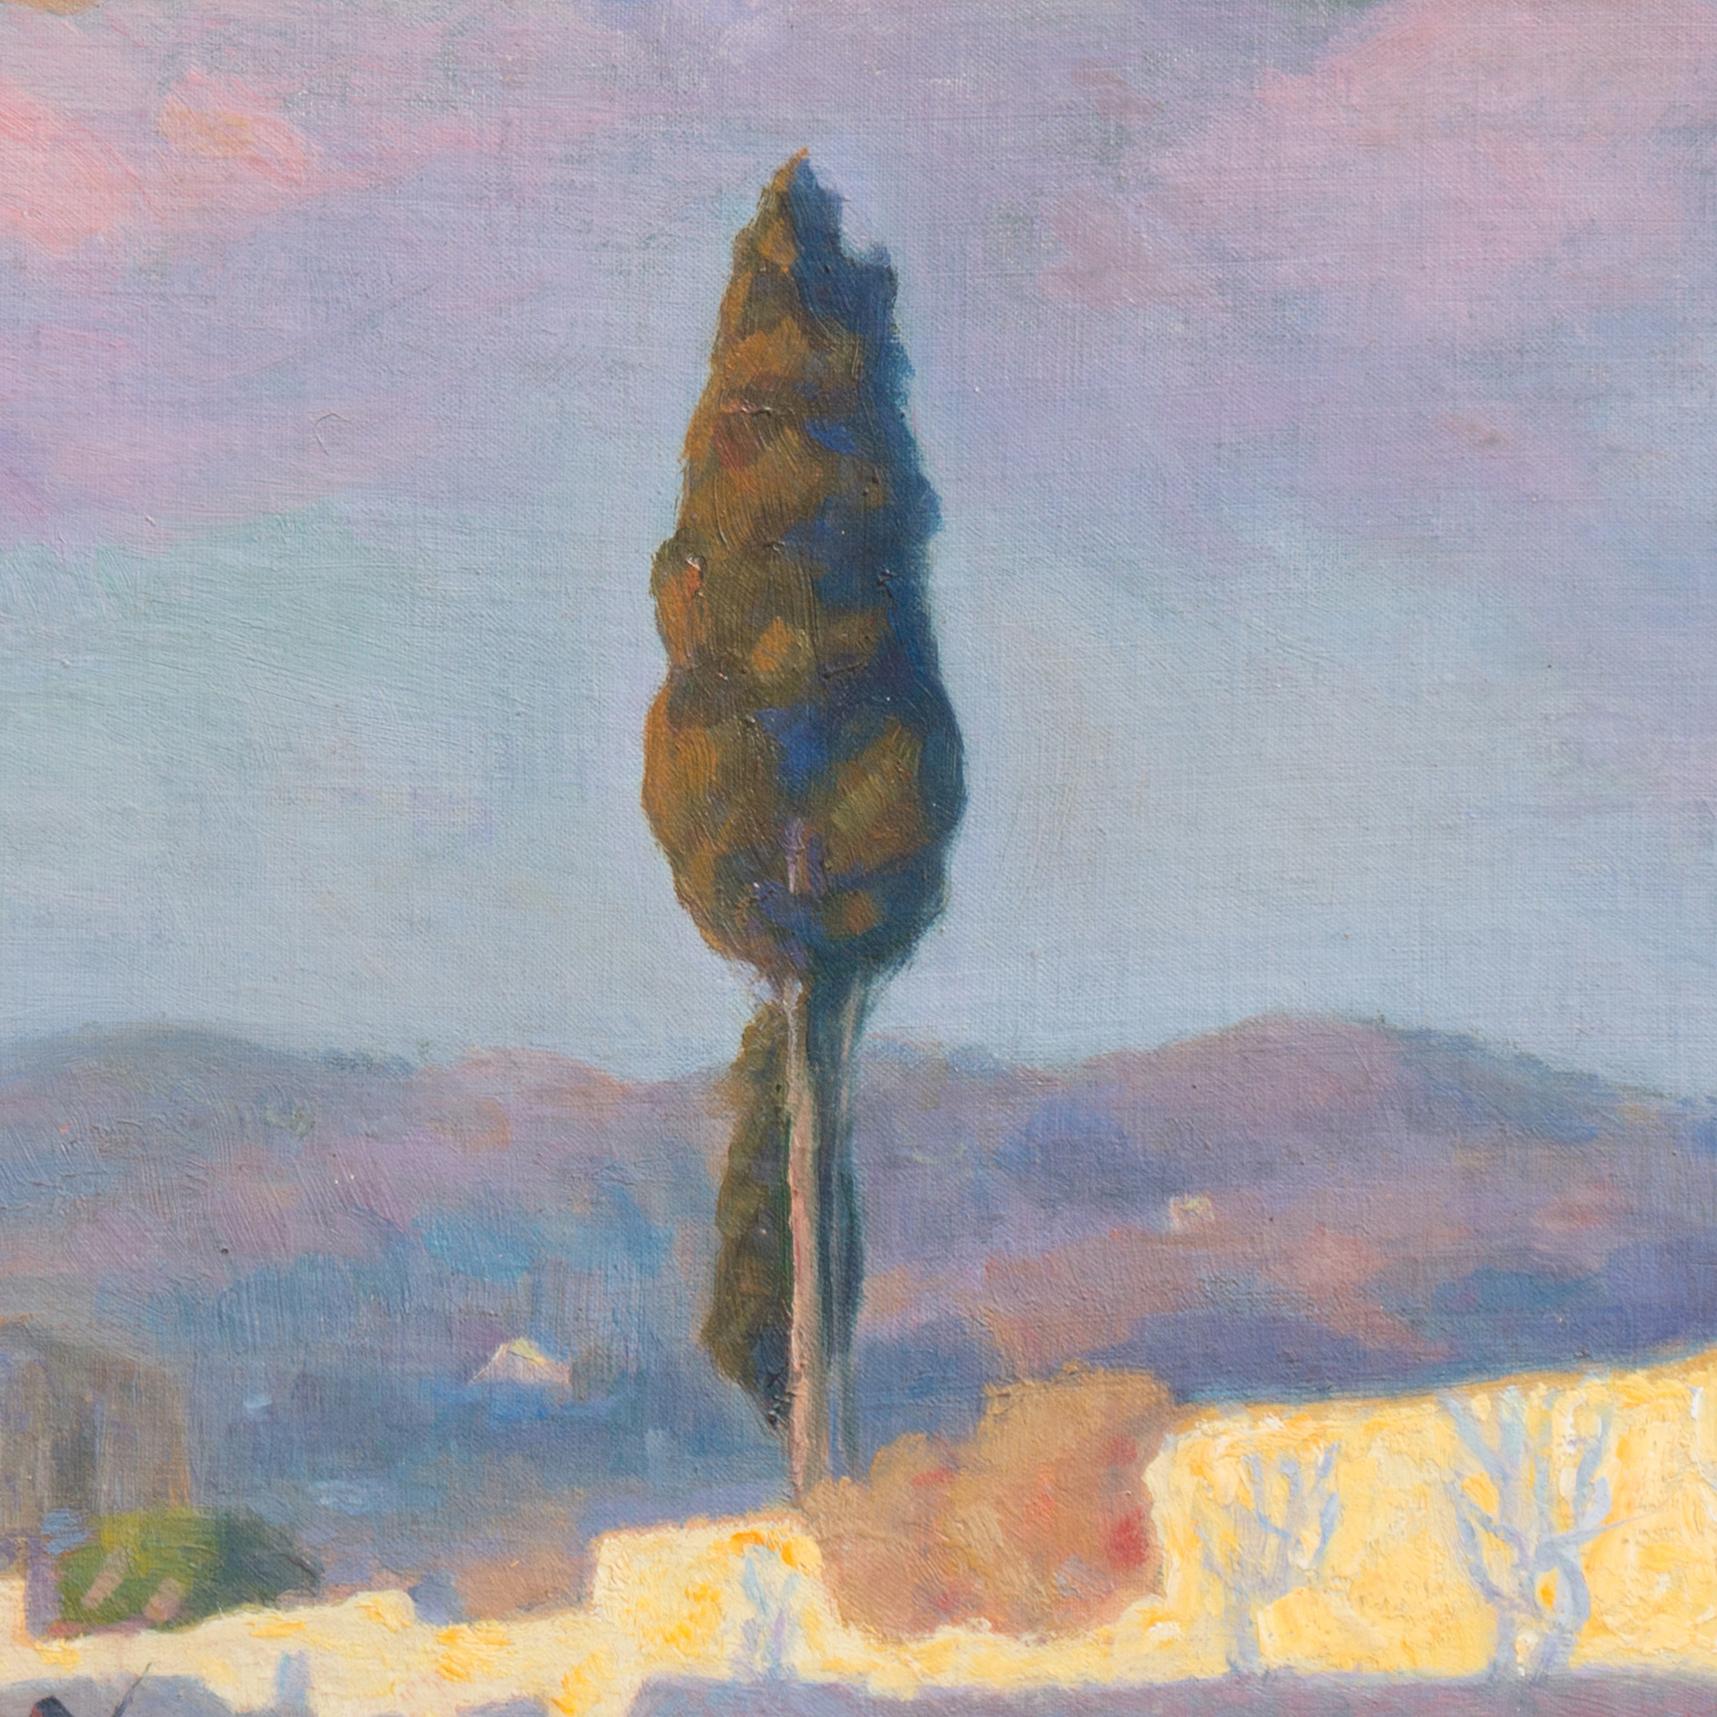 'Sunny Afternoon, Hyères, Côte d’Azur', French Riviera, Royal Academy of Art Oil - Gray Landscape Painting by Carl Conrad Stilling